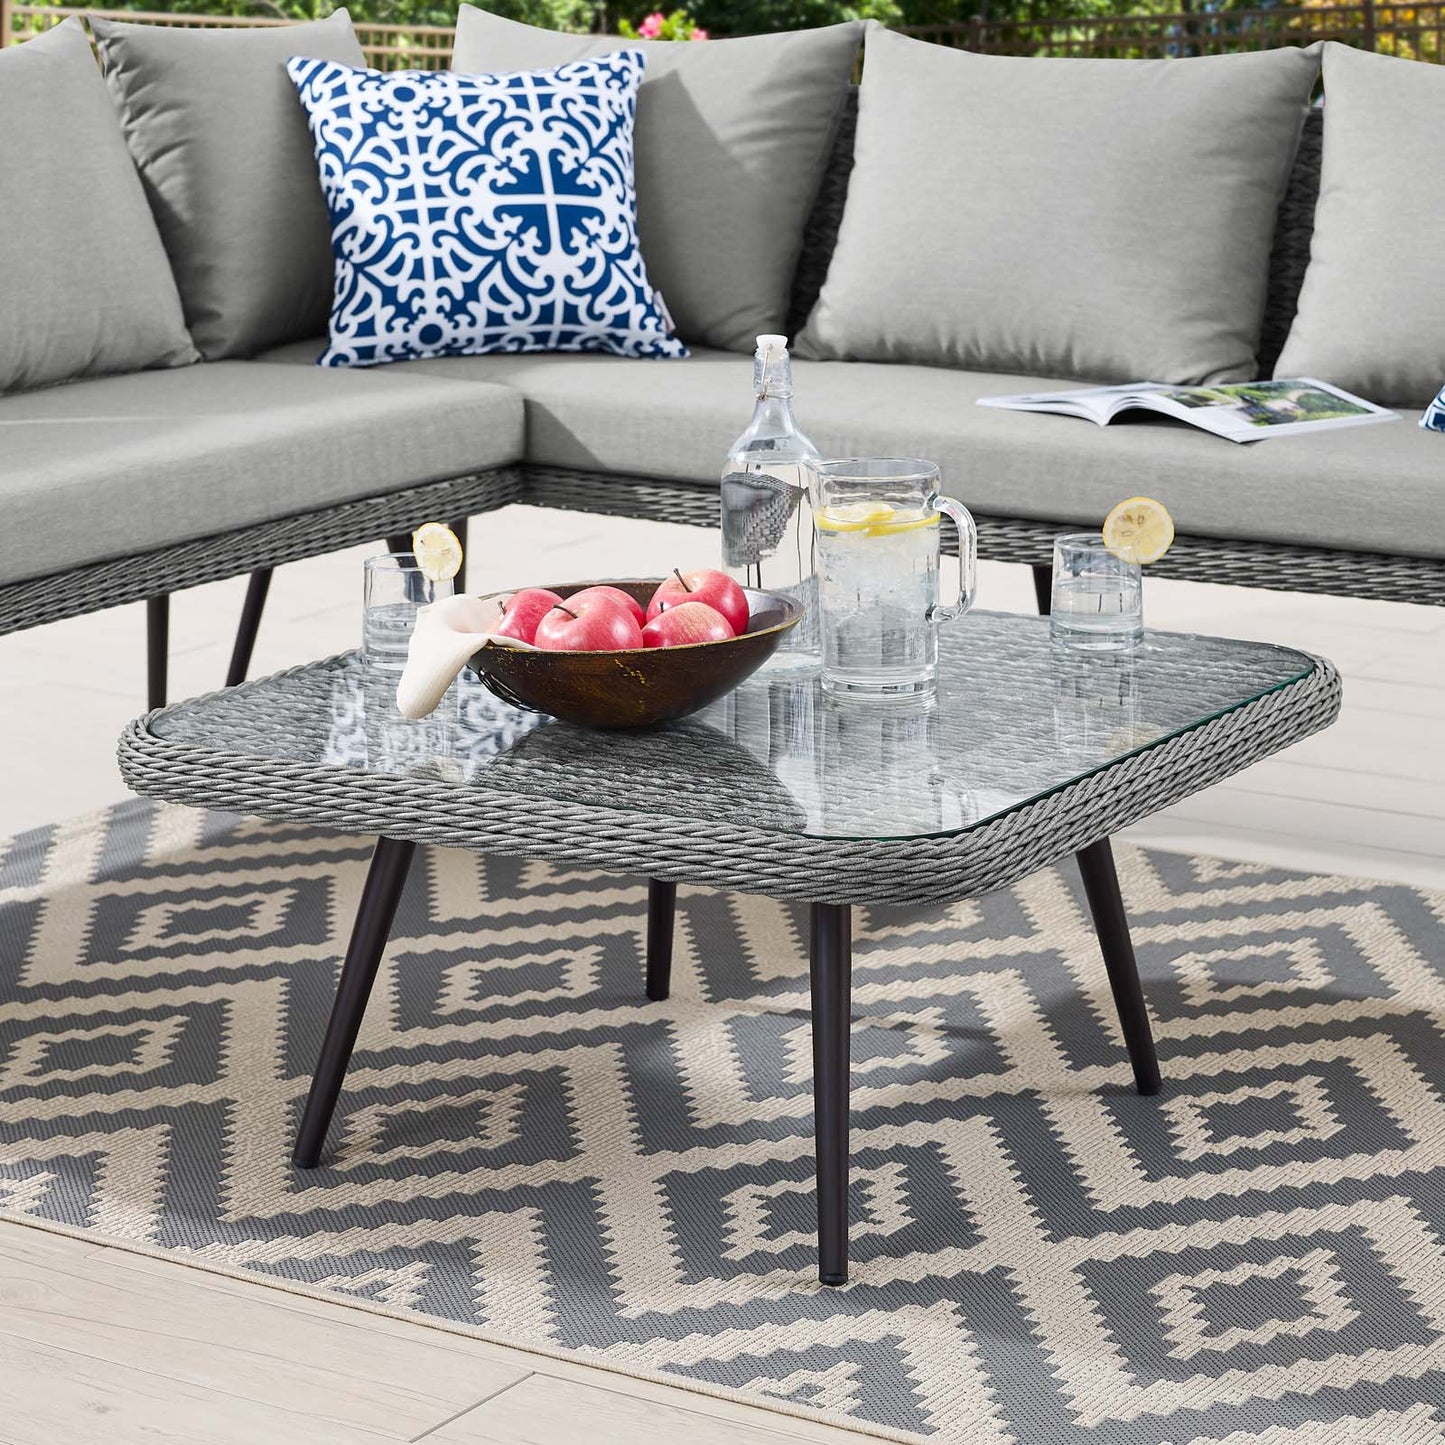 Endeavor Outdoor Patio Wicker Rattan Square Coffee Table Gray EEI-4659-GRY